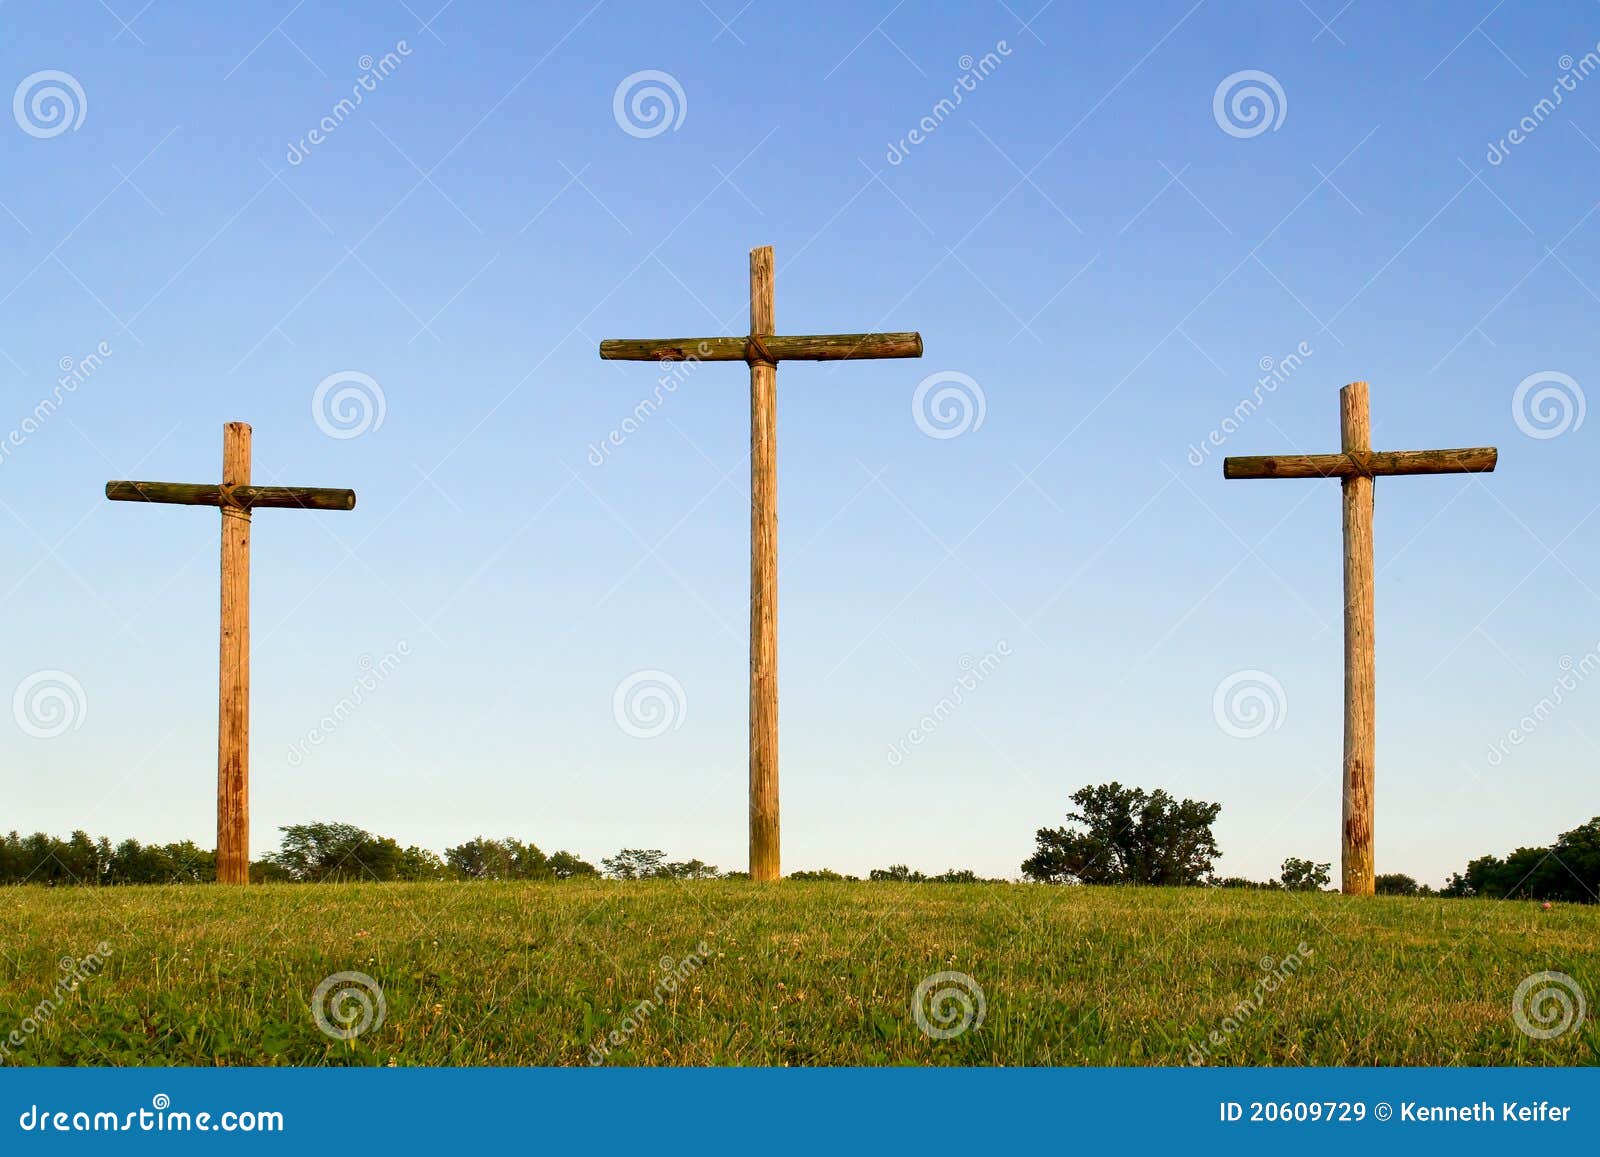 old rugged cross and horizon